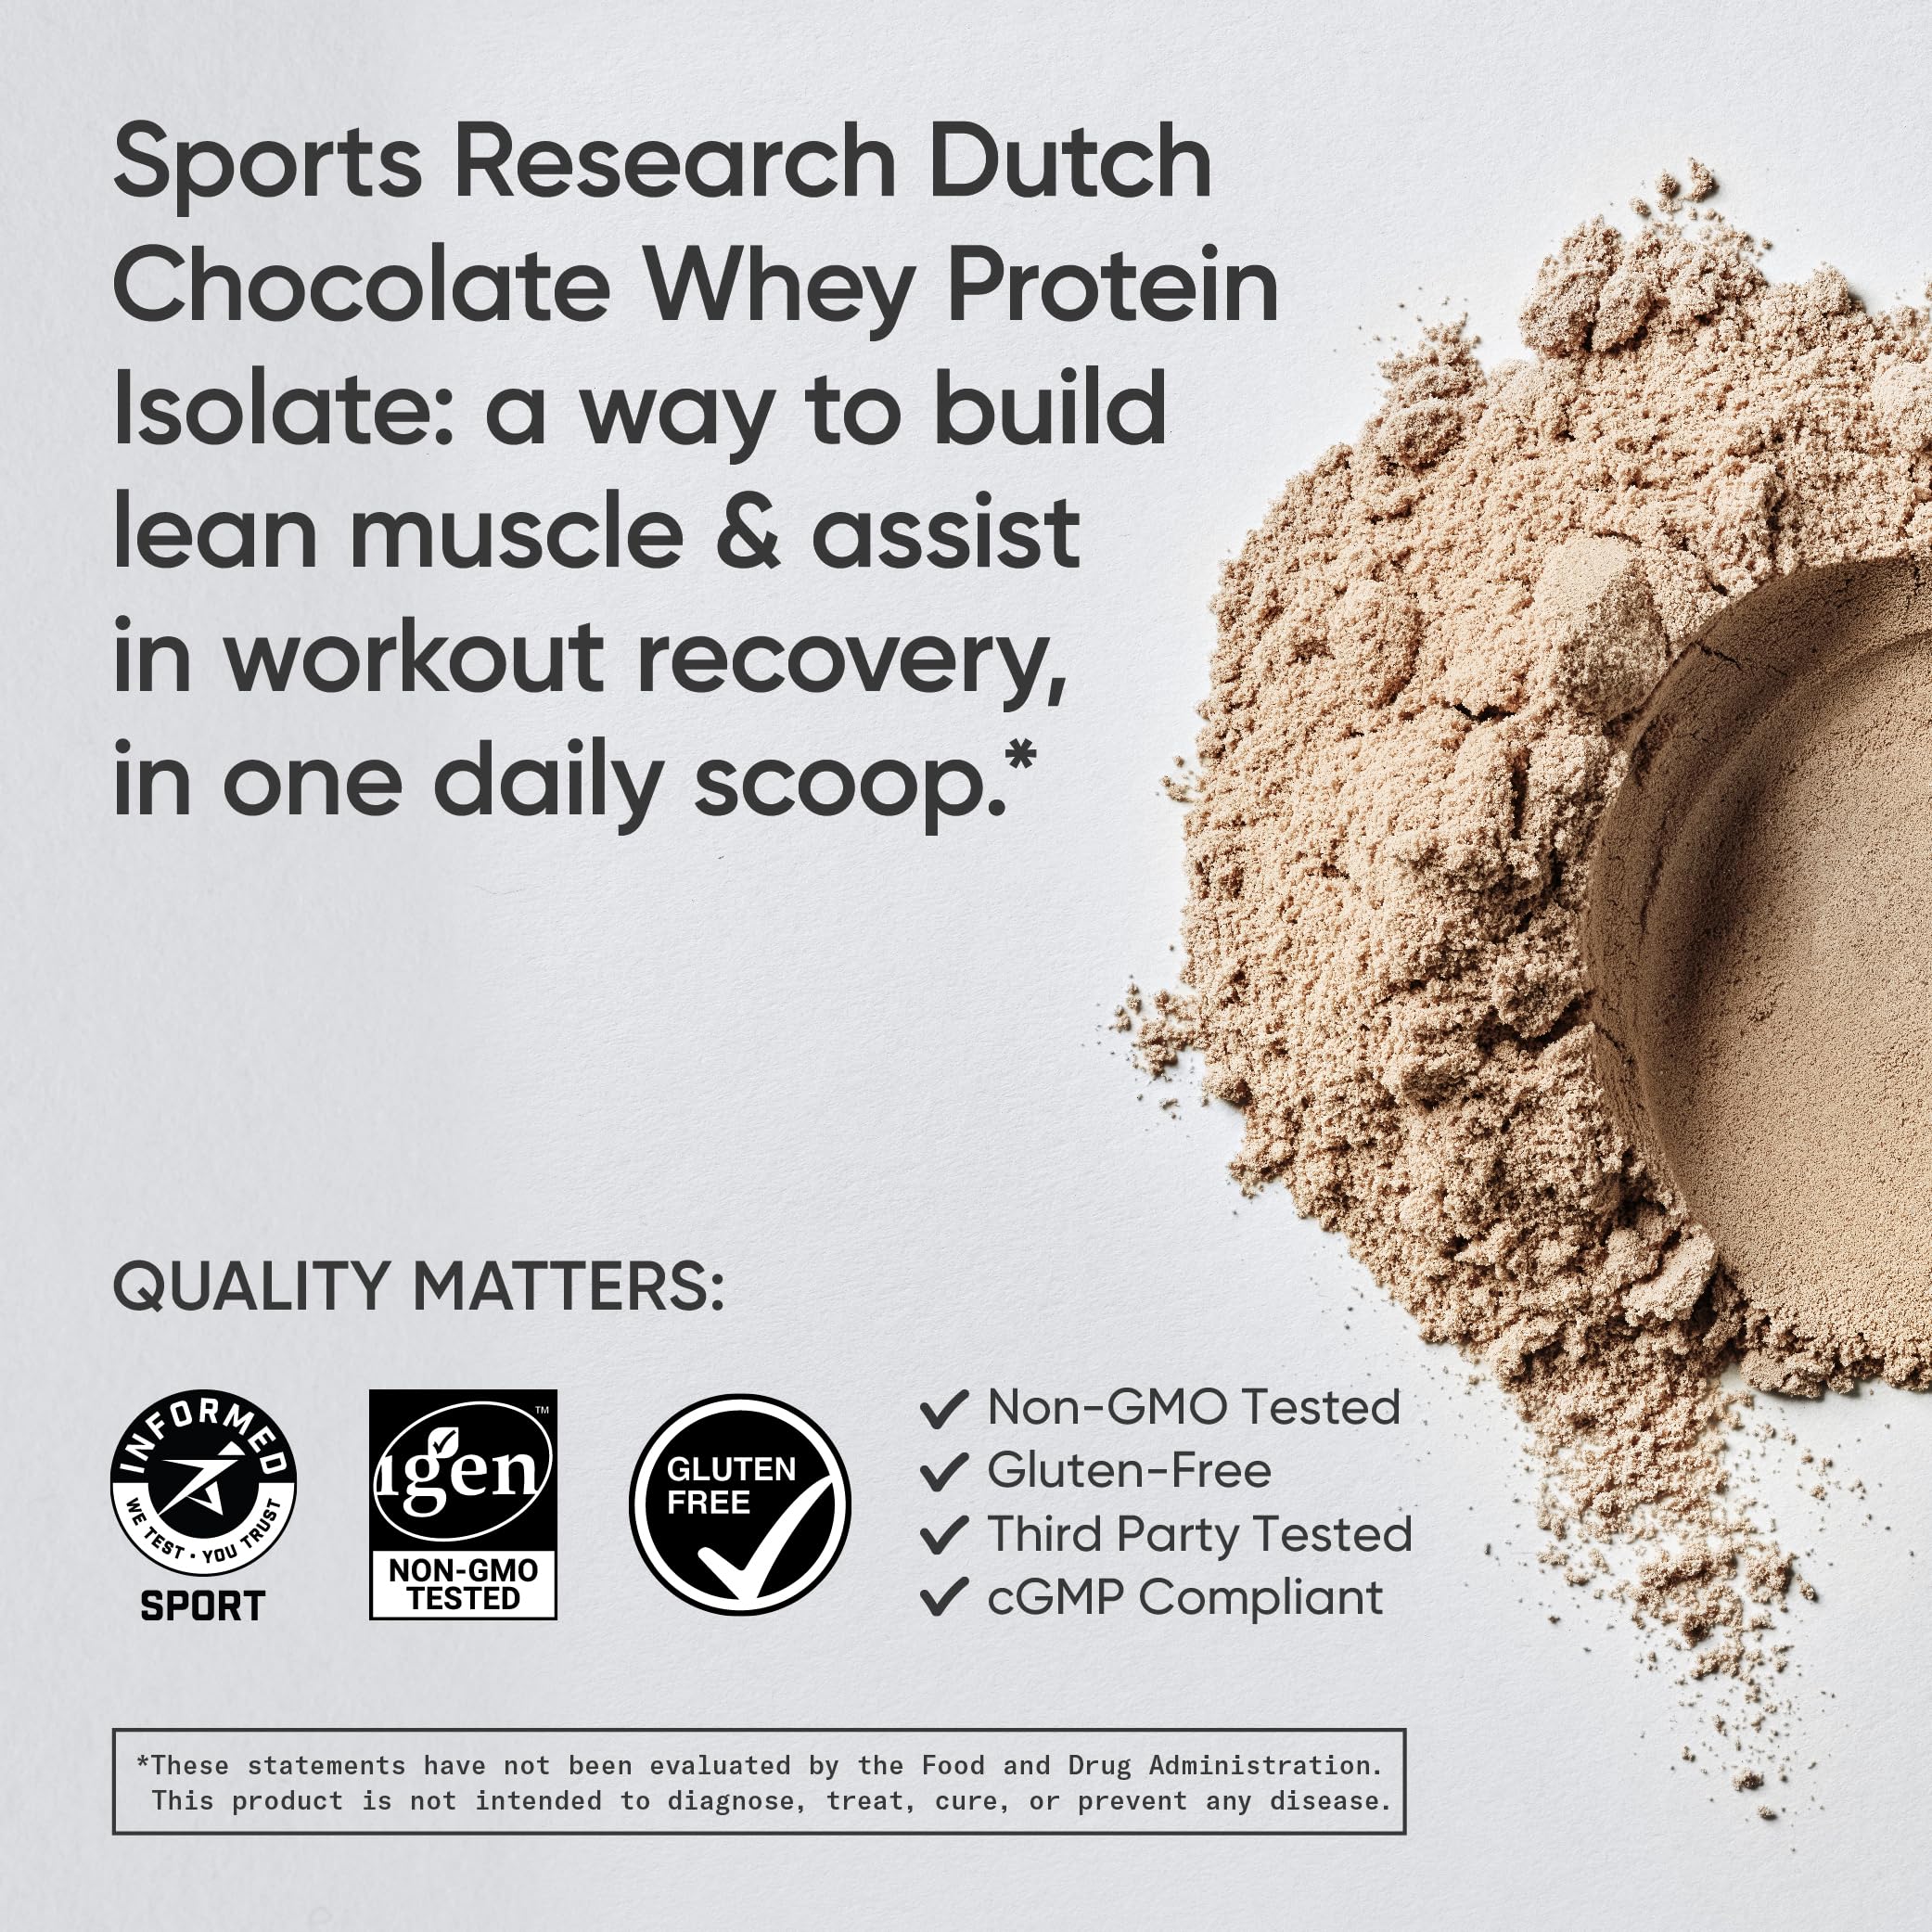 Sports Research Whey Protein - Sports Nutrition Whey Isolate Protein Powder for Lean Muscle Building & Workout Recovery - 5 lb Bag Bulk Protein Powder 25g per Serving - Dutch Chocolate, 56 Servings